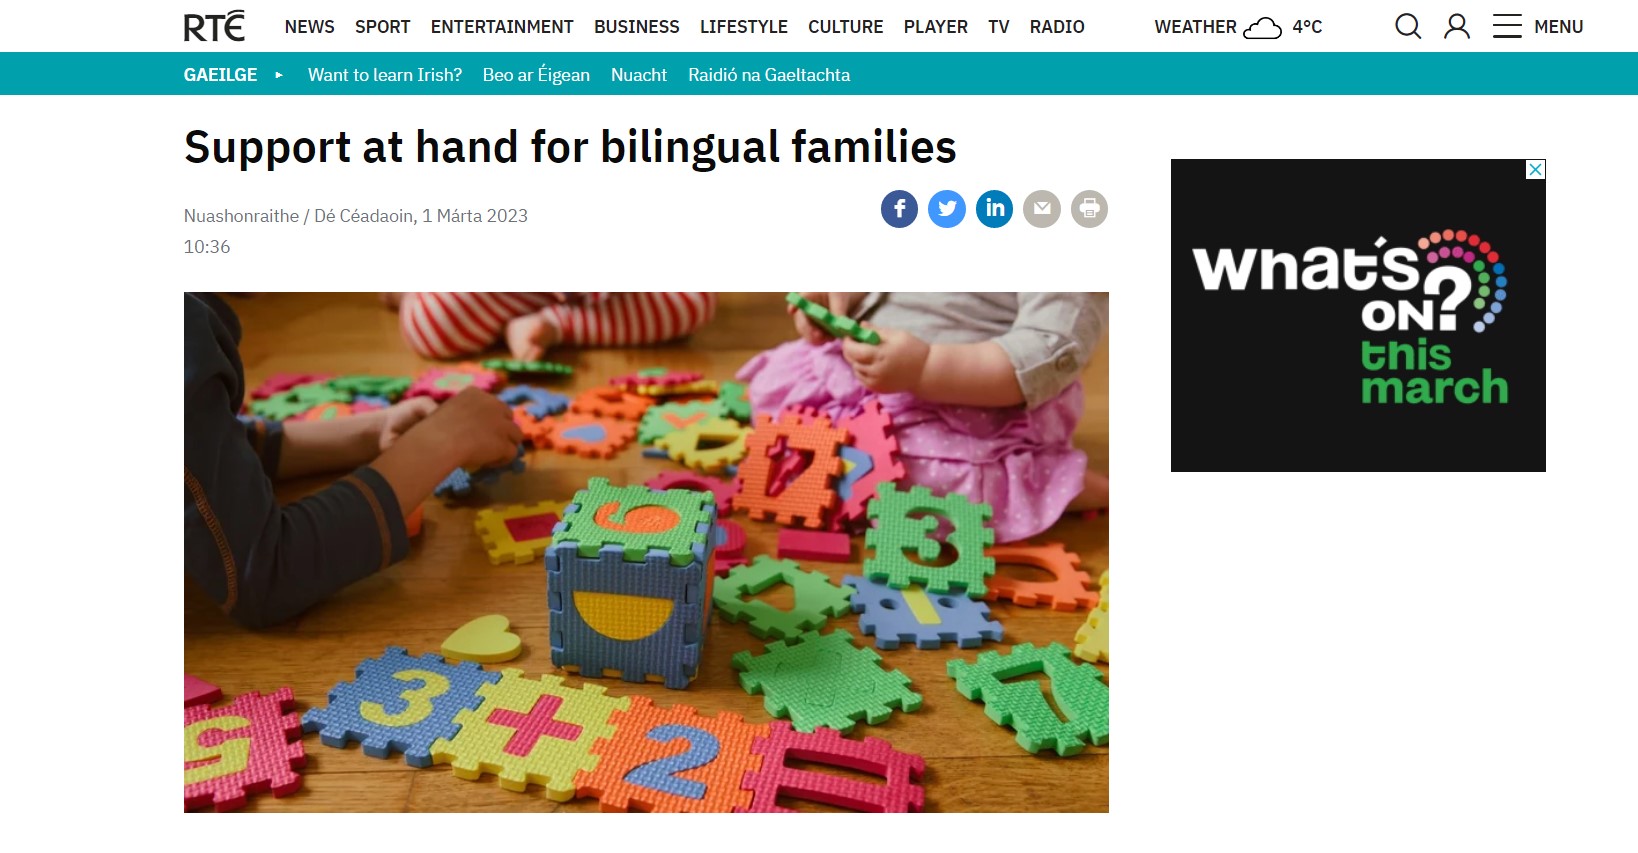 Support for Bilingual Families